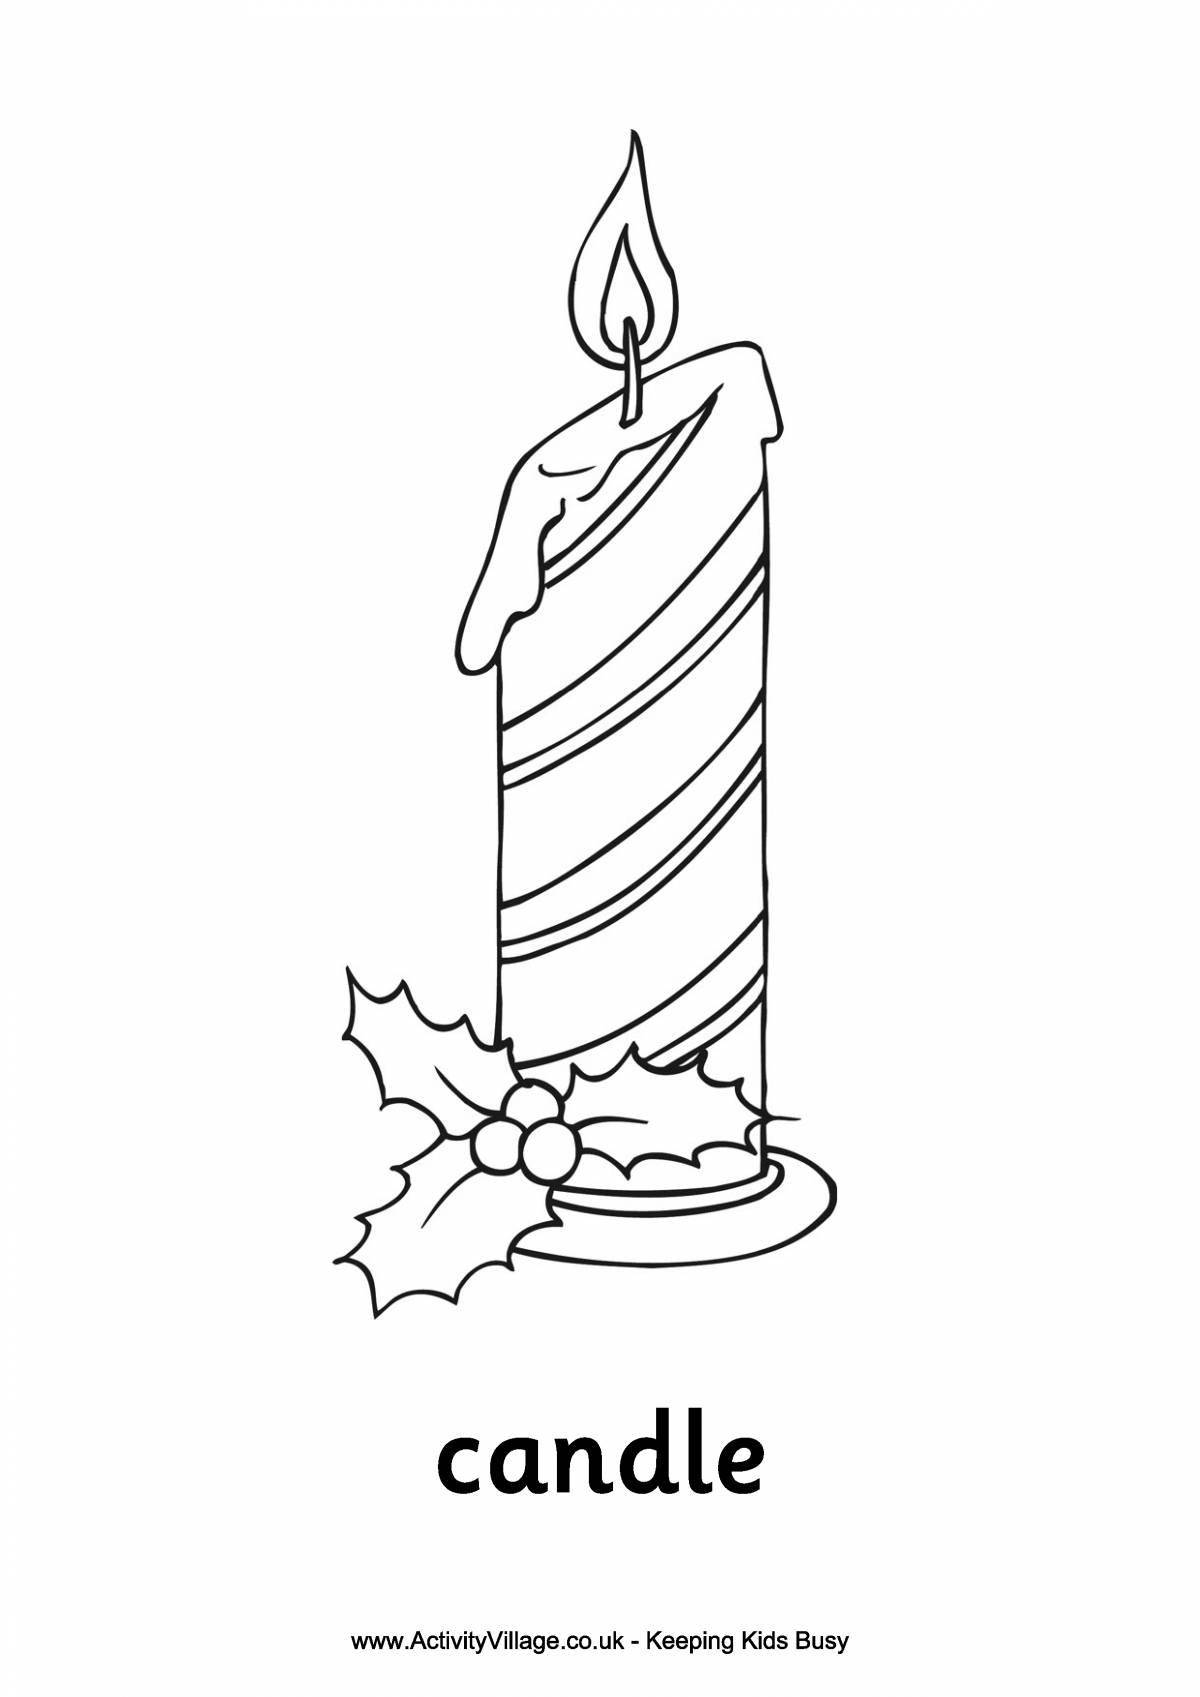 Gorgeous Christmas candle coloring book